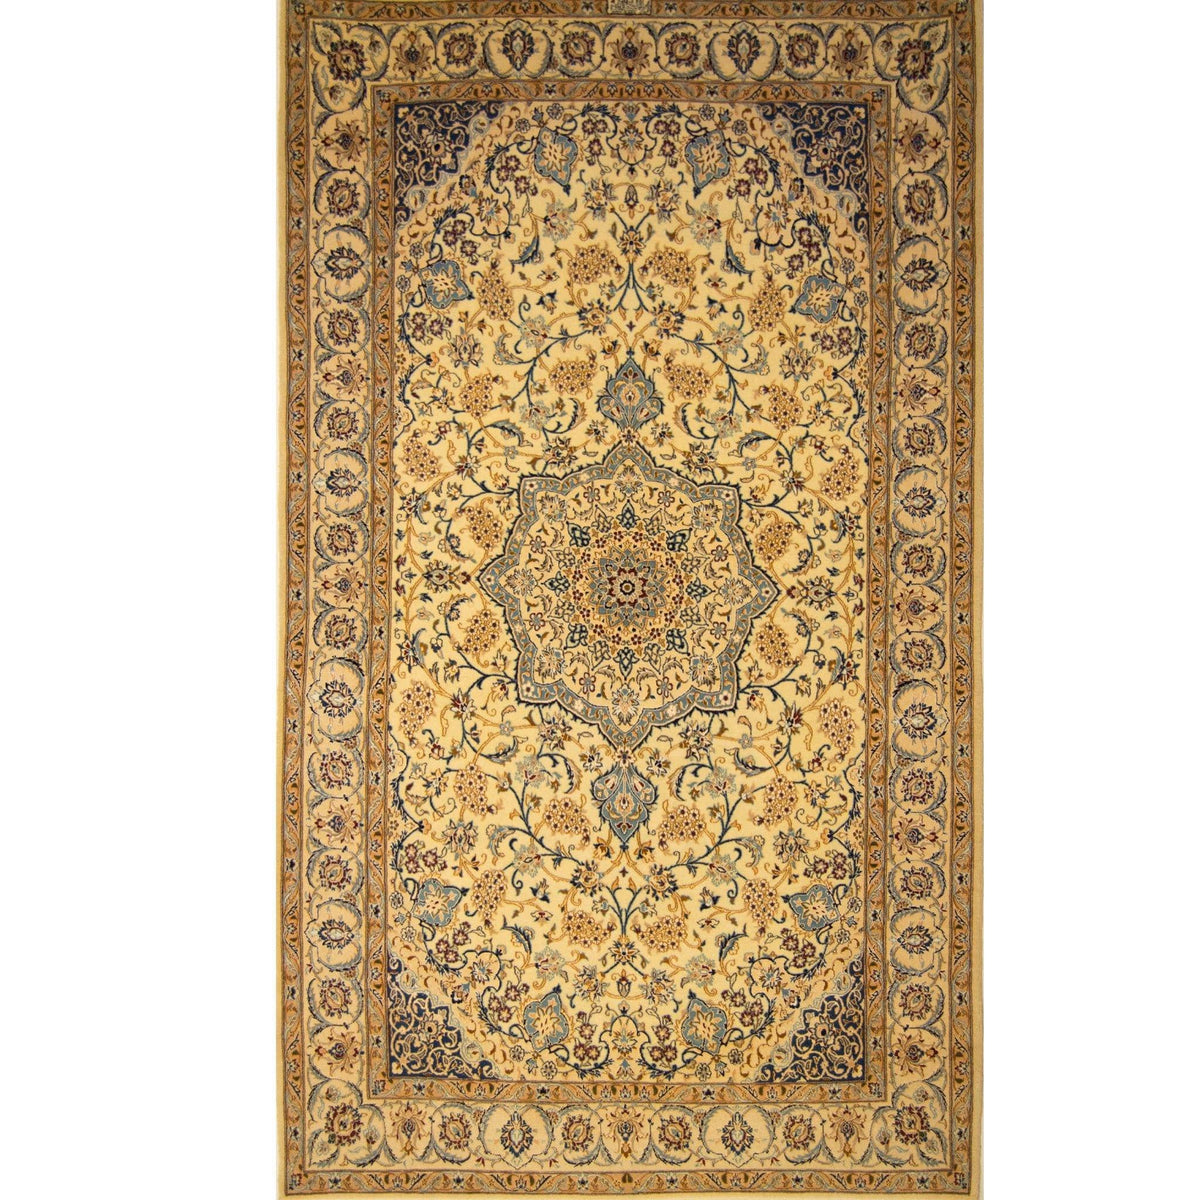 Super Fine Hand-knotted 3LAA Nain Persian Wool &amp; Silk Rug ( SIGNED HABIBIAN )137cm x 235cm